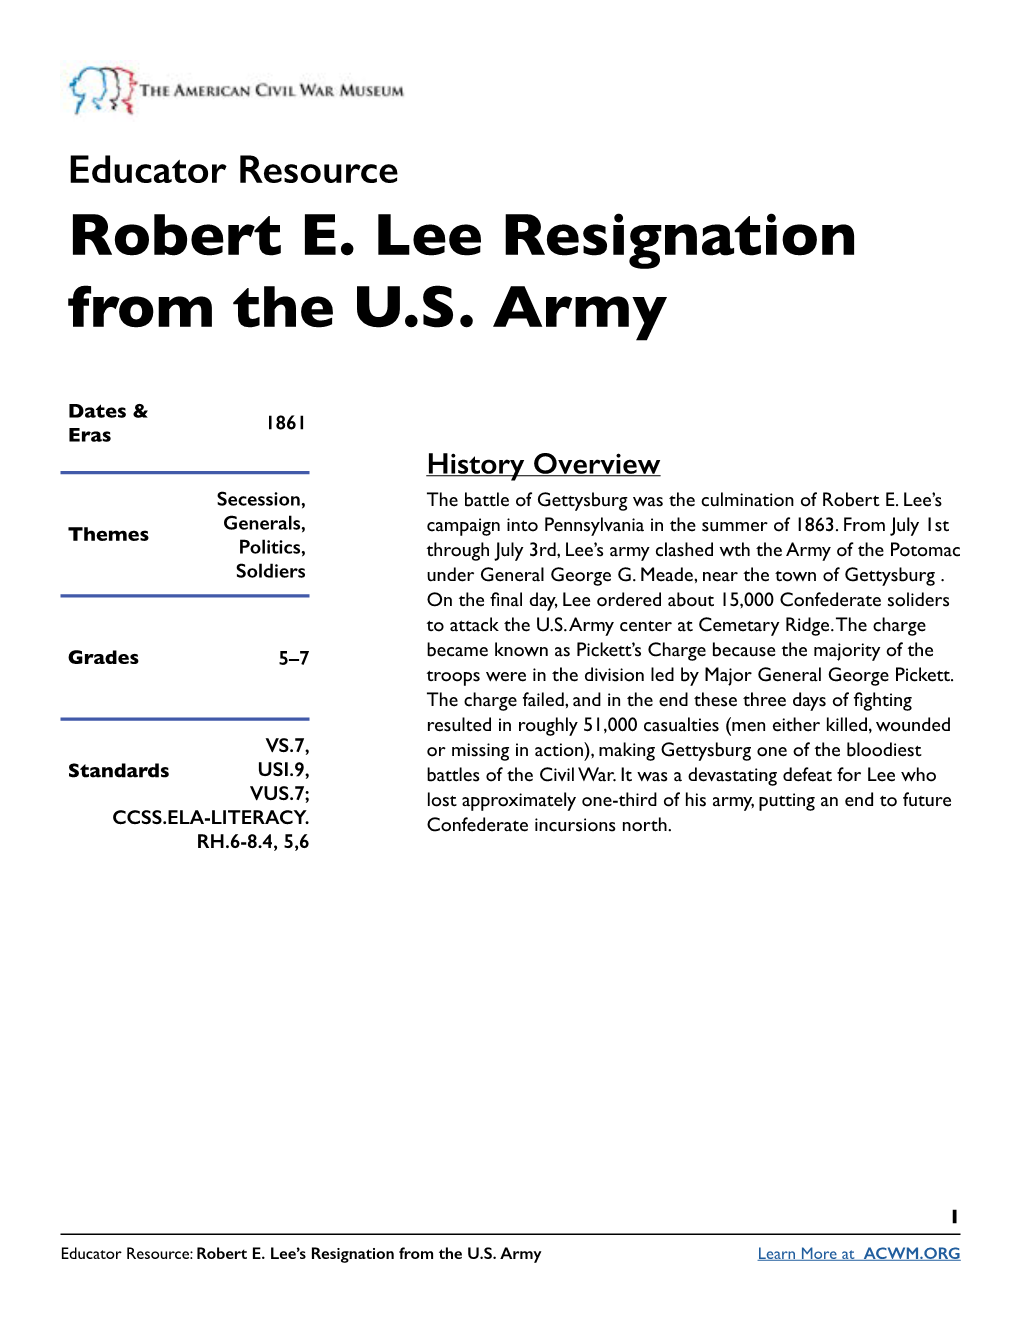 Robert E. Lee Resignation from the U.S. Army